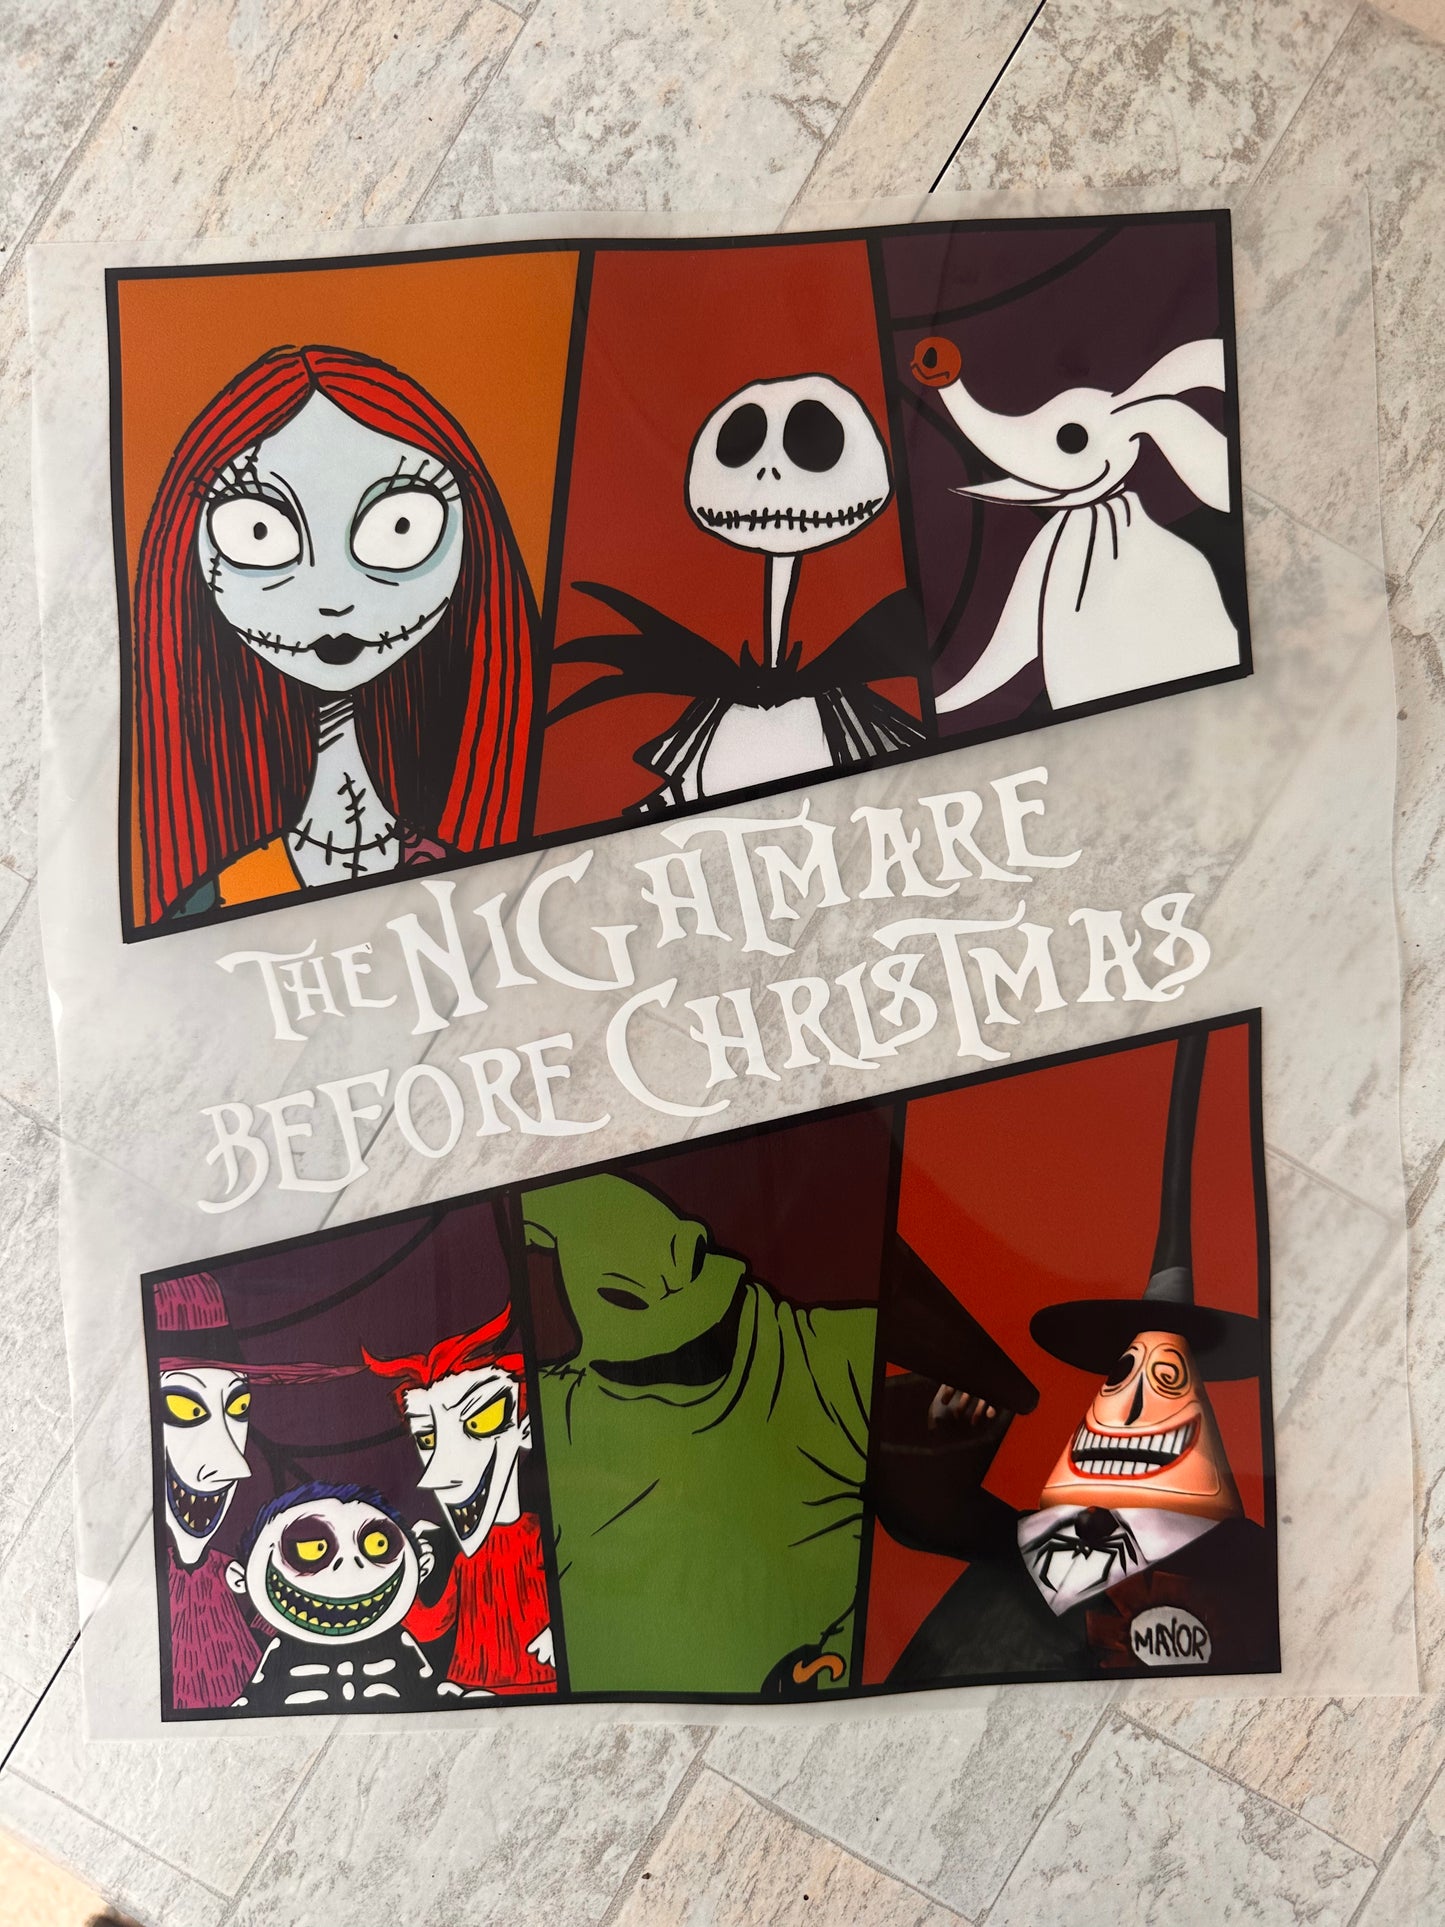 The Nightmare before Christmas Comic Book